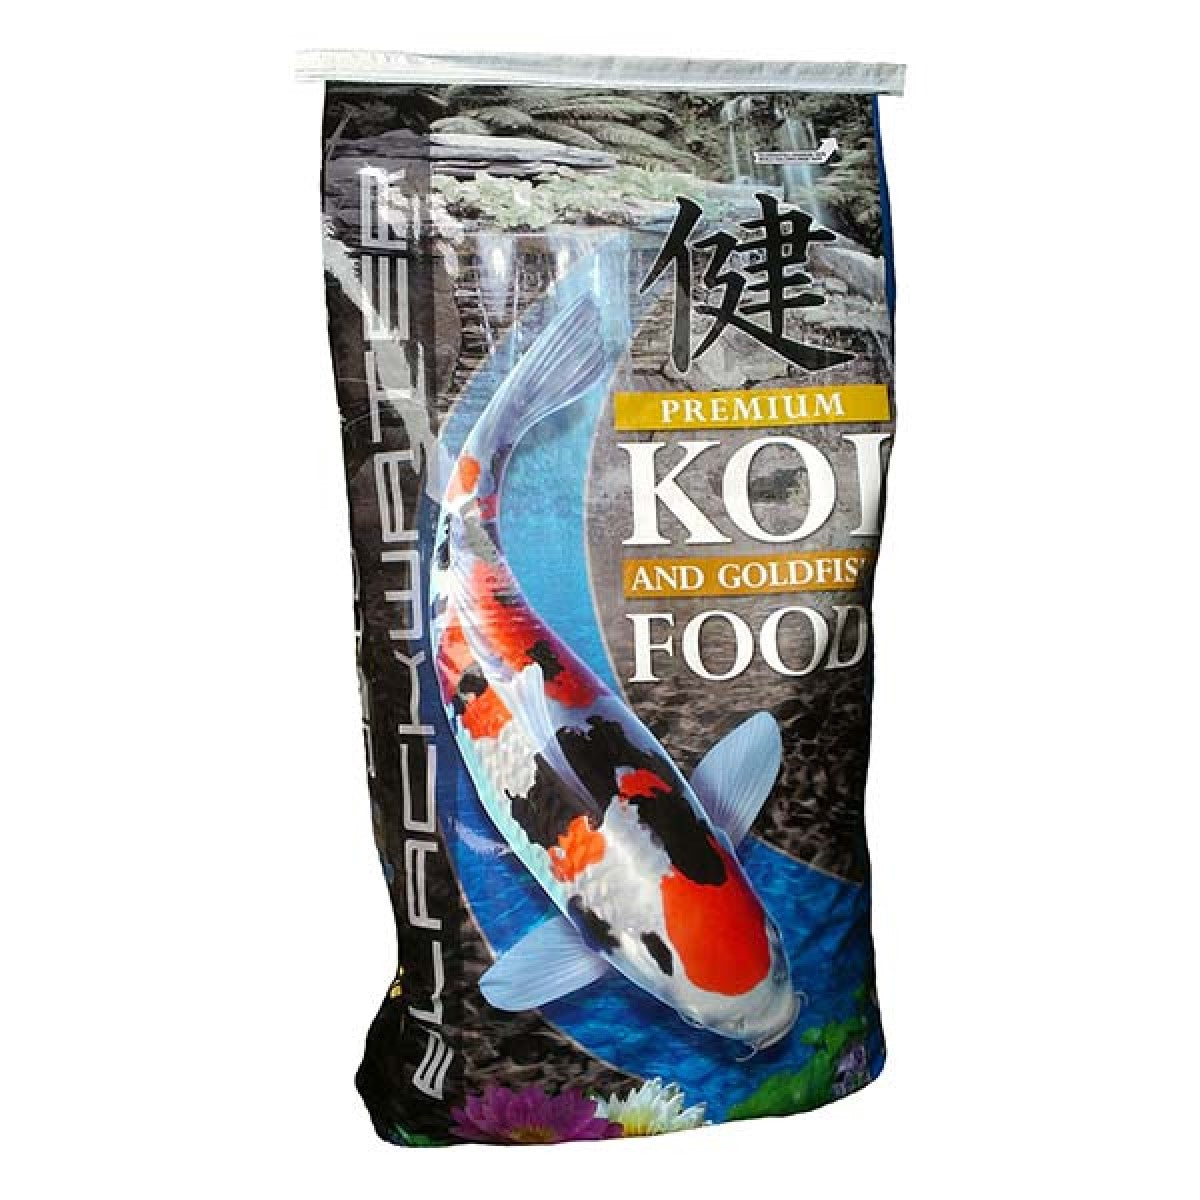 Blackwater Max Growth koi food from Blackwater Creek is designed to give your koi and pond fish maximum growth.